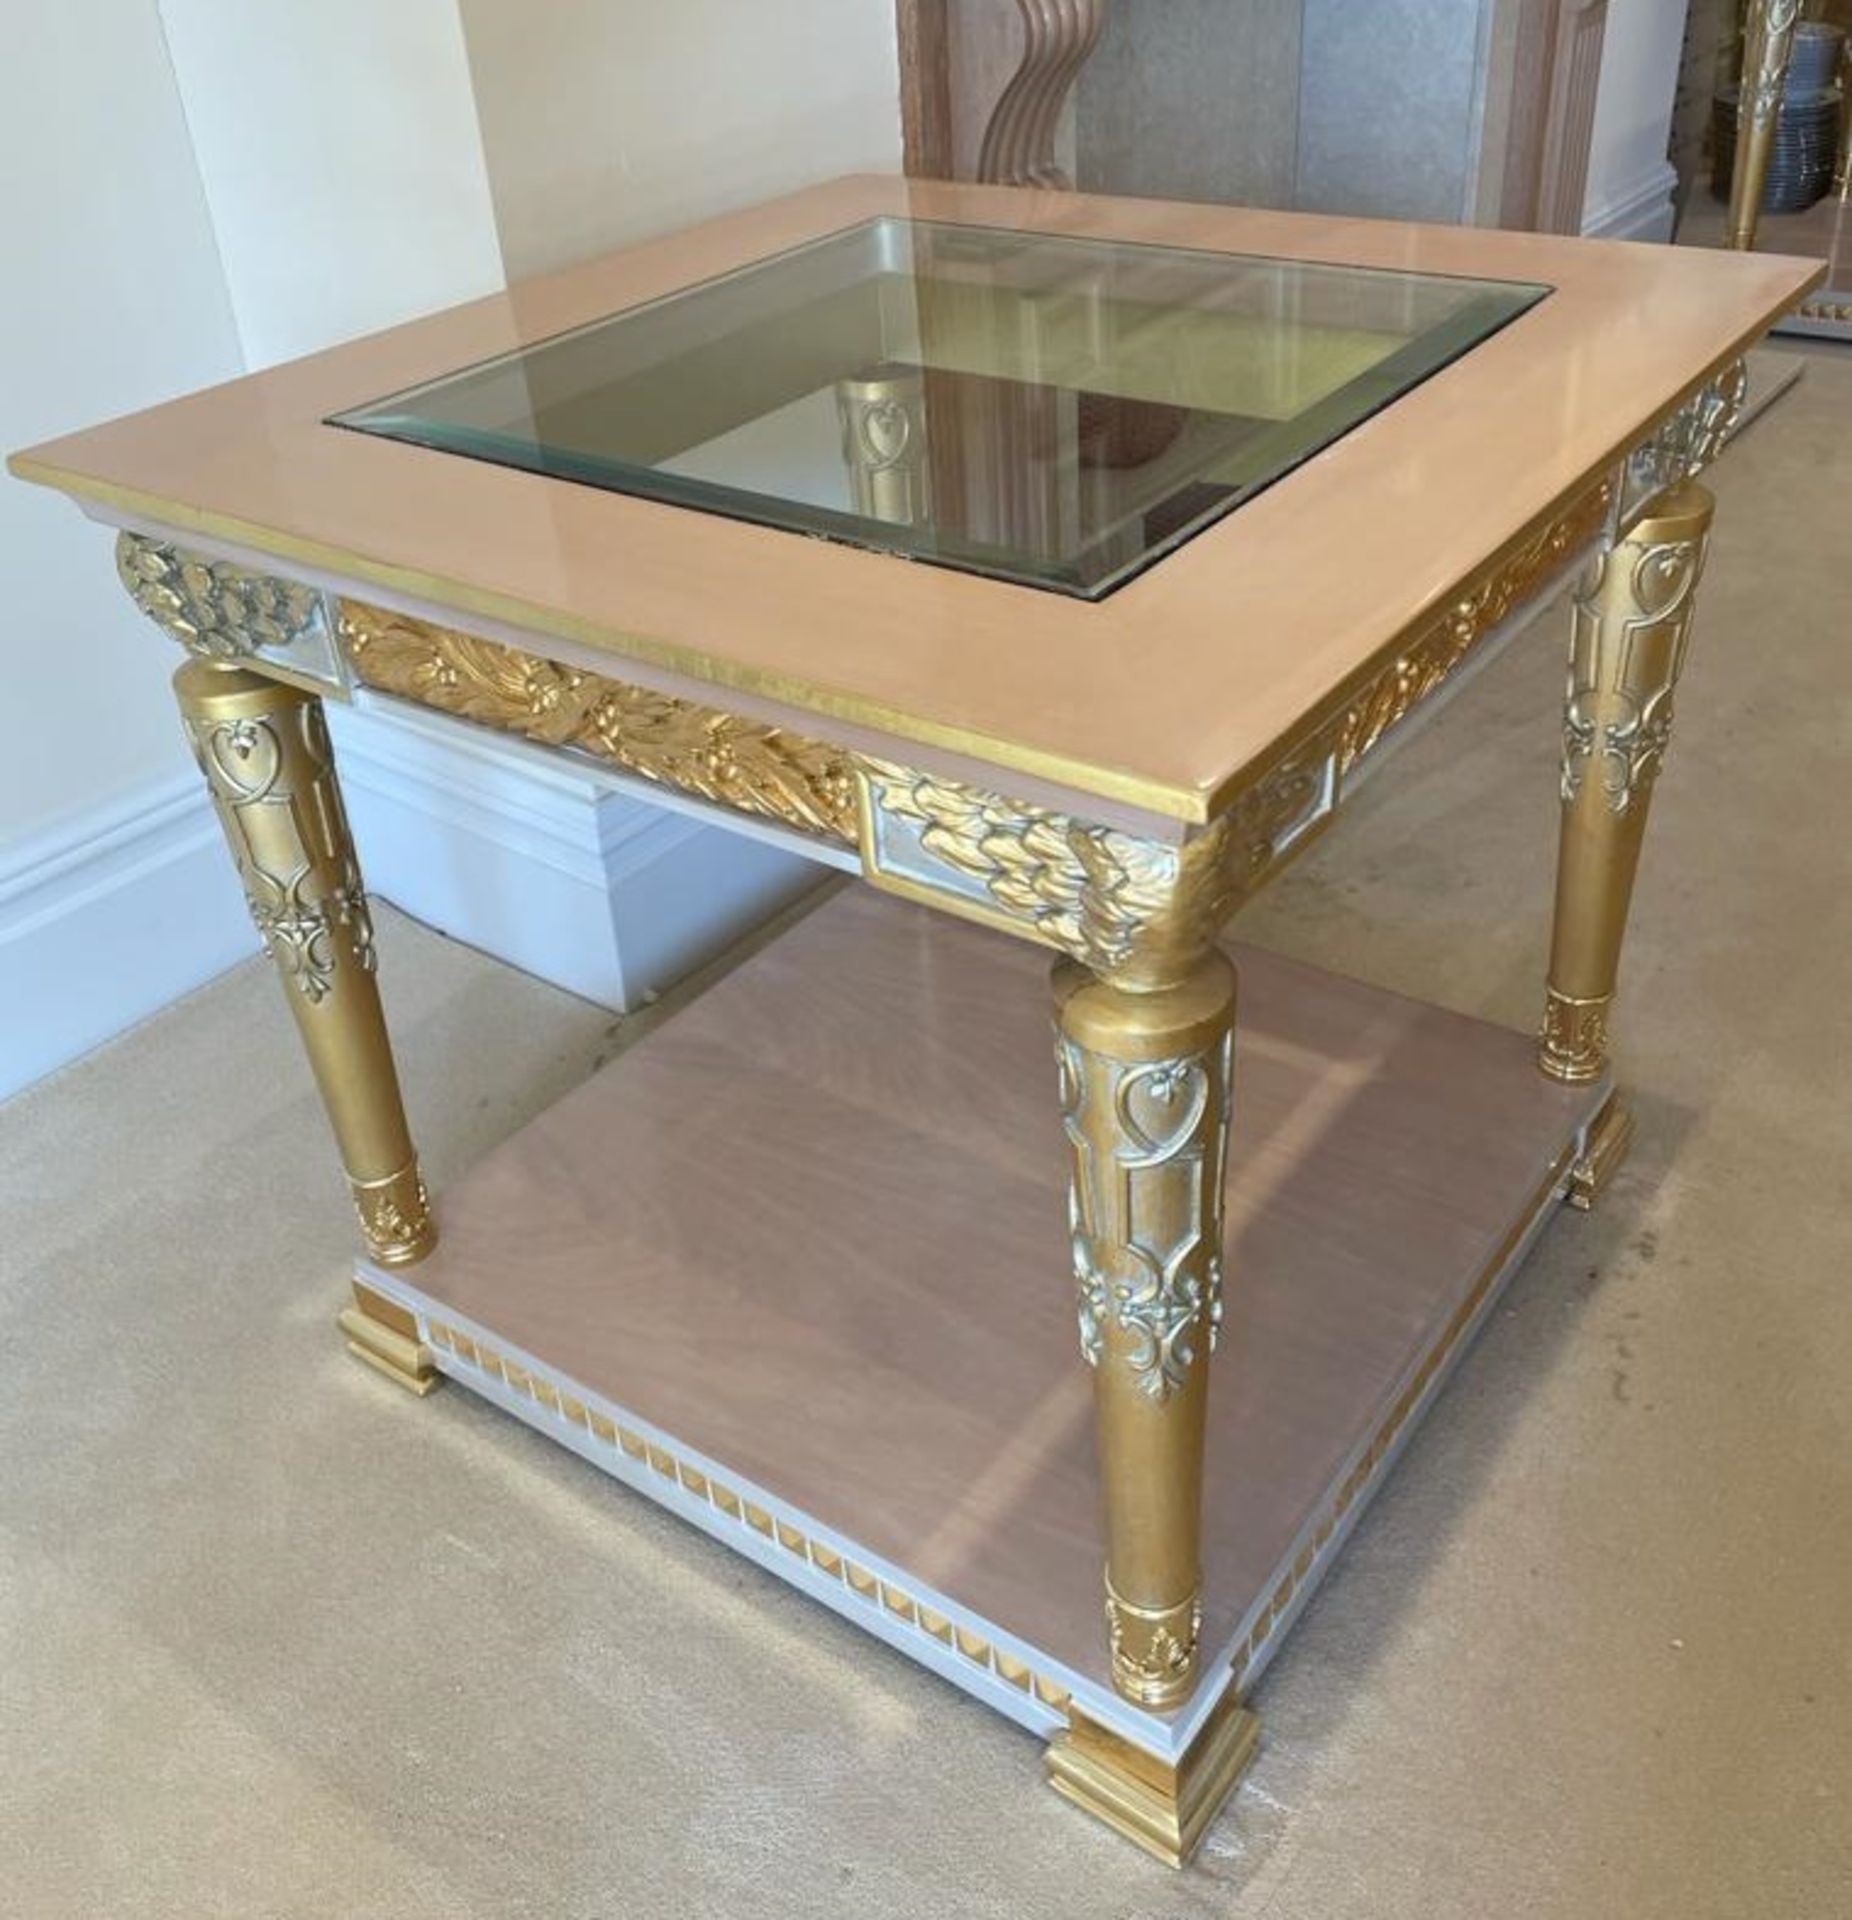 2 x Hand Carved Ornate Side Tables Complimented With Birchwood Veneer, Golden Pillar Legs, Carved